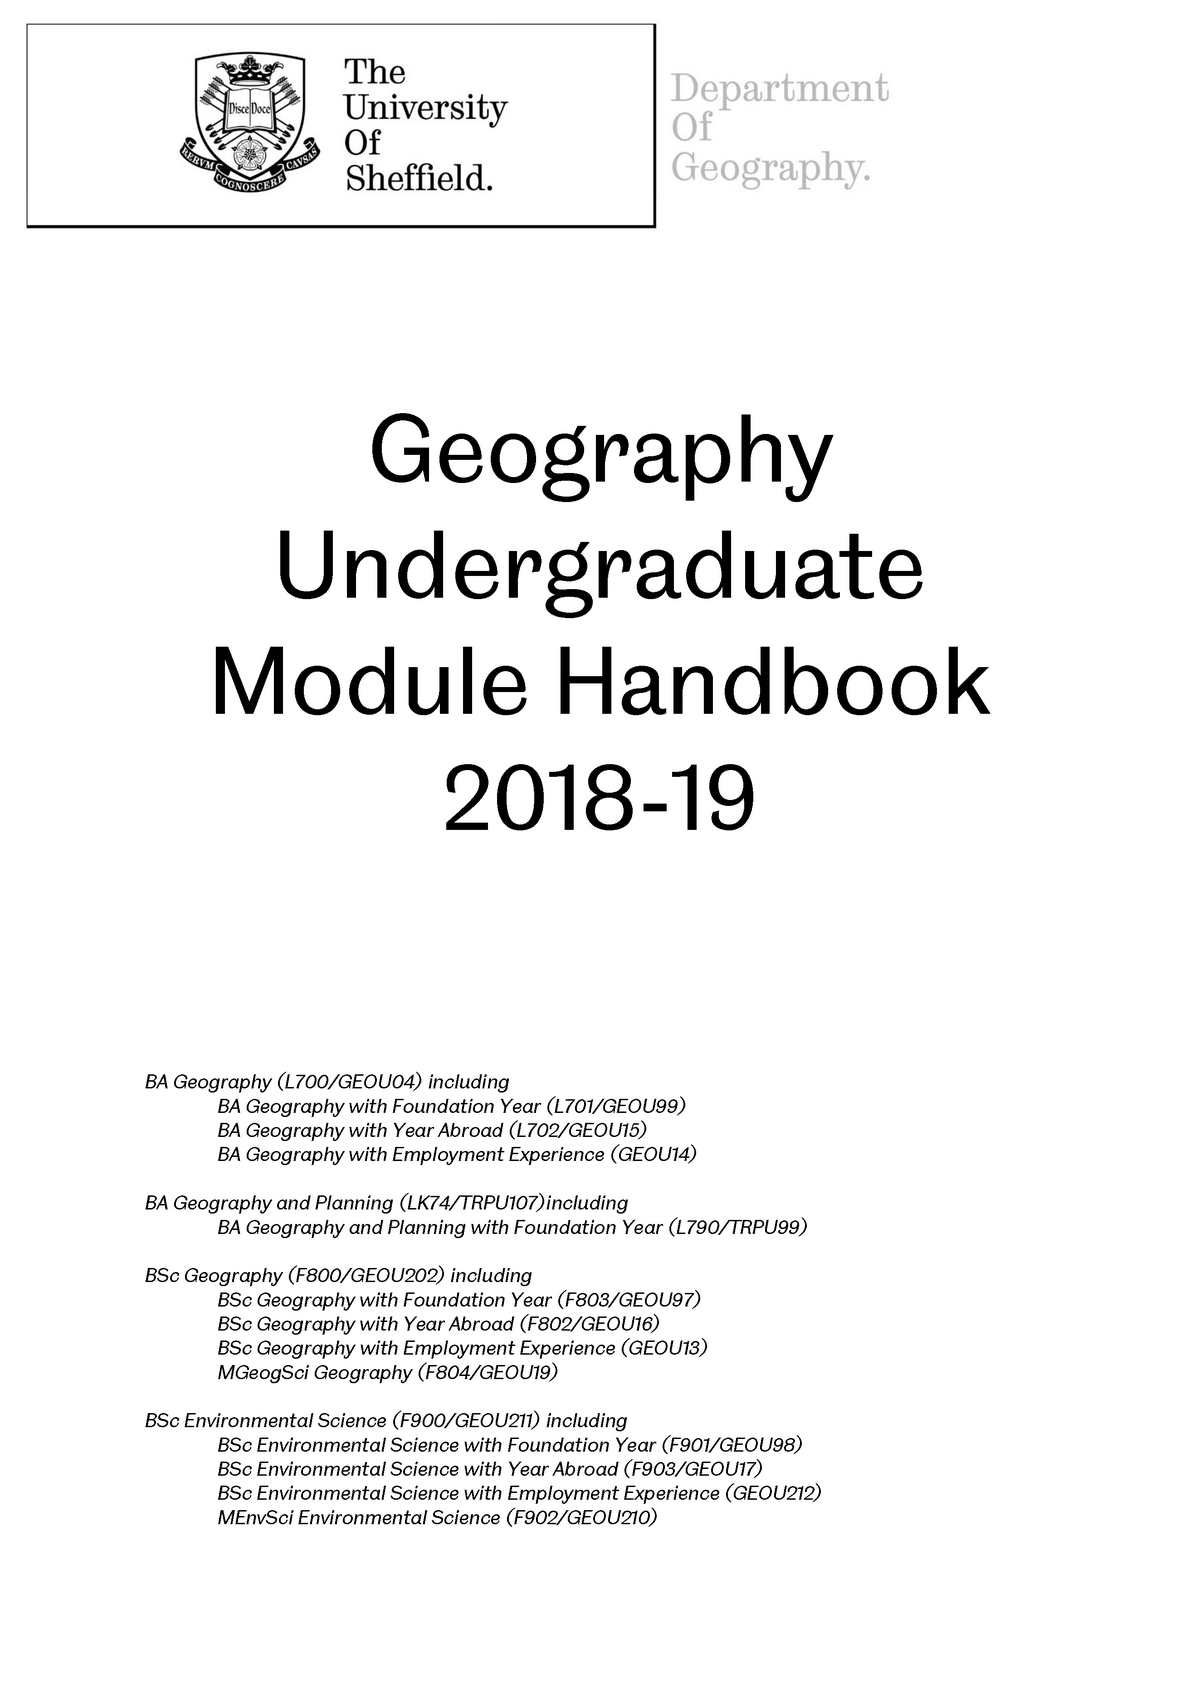 physical geography undergraduate dissertations